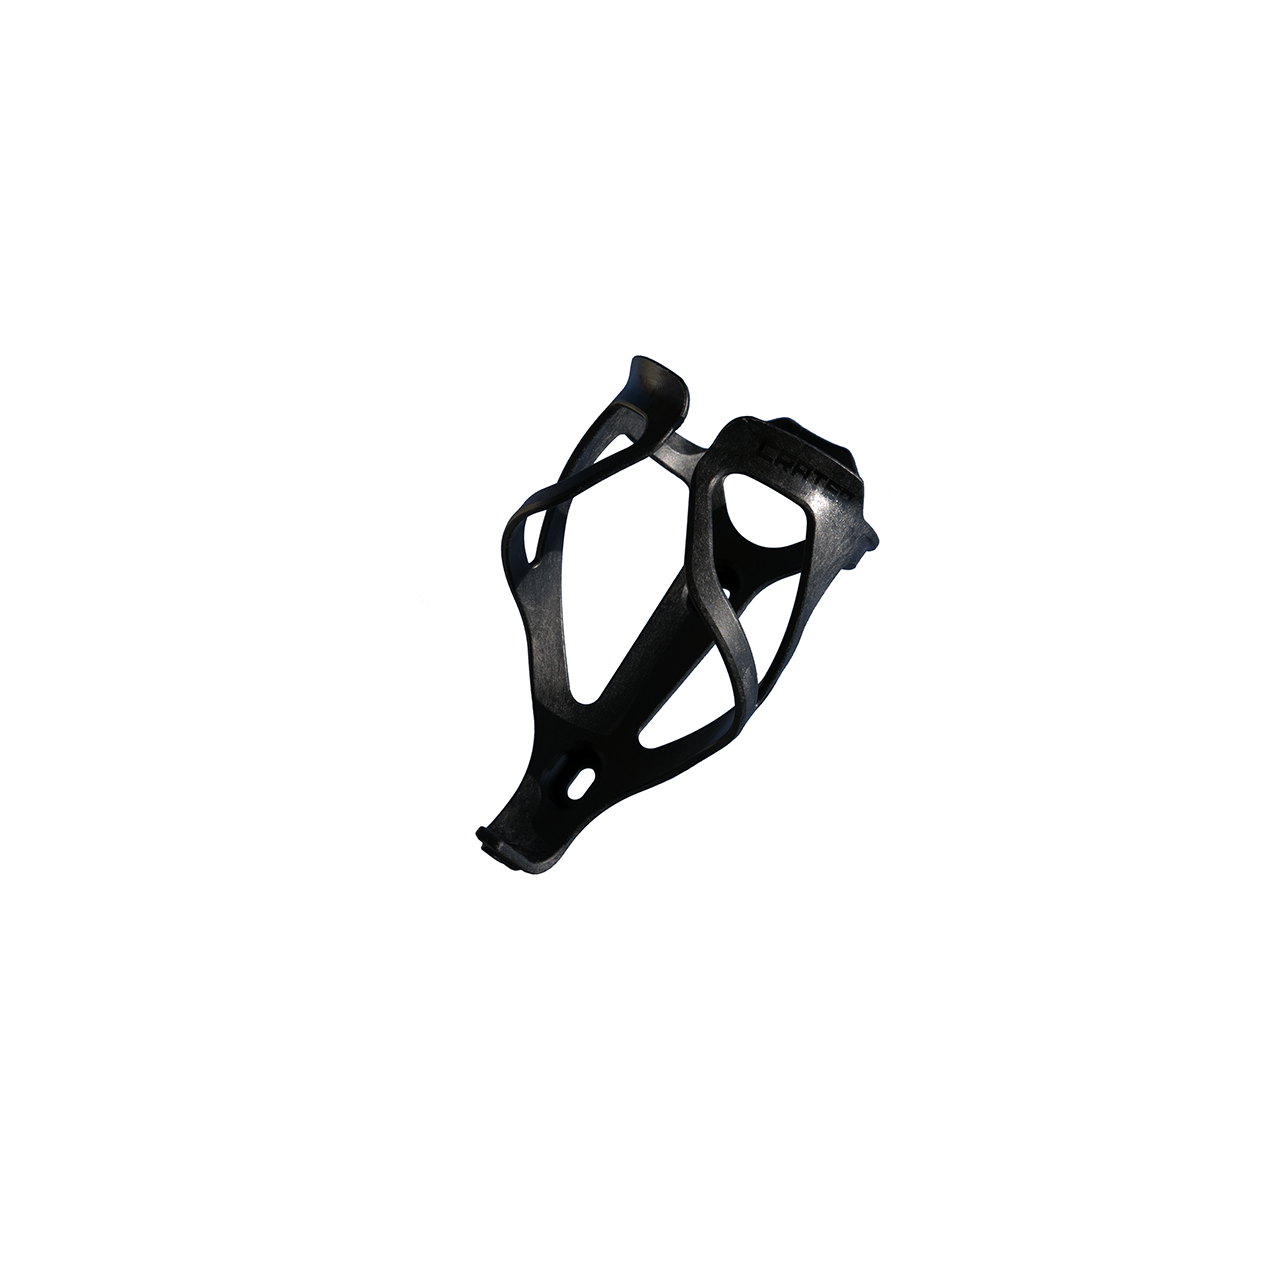 Venn Crater carbon bicycle water bottle cage